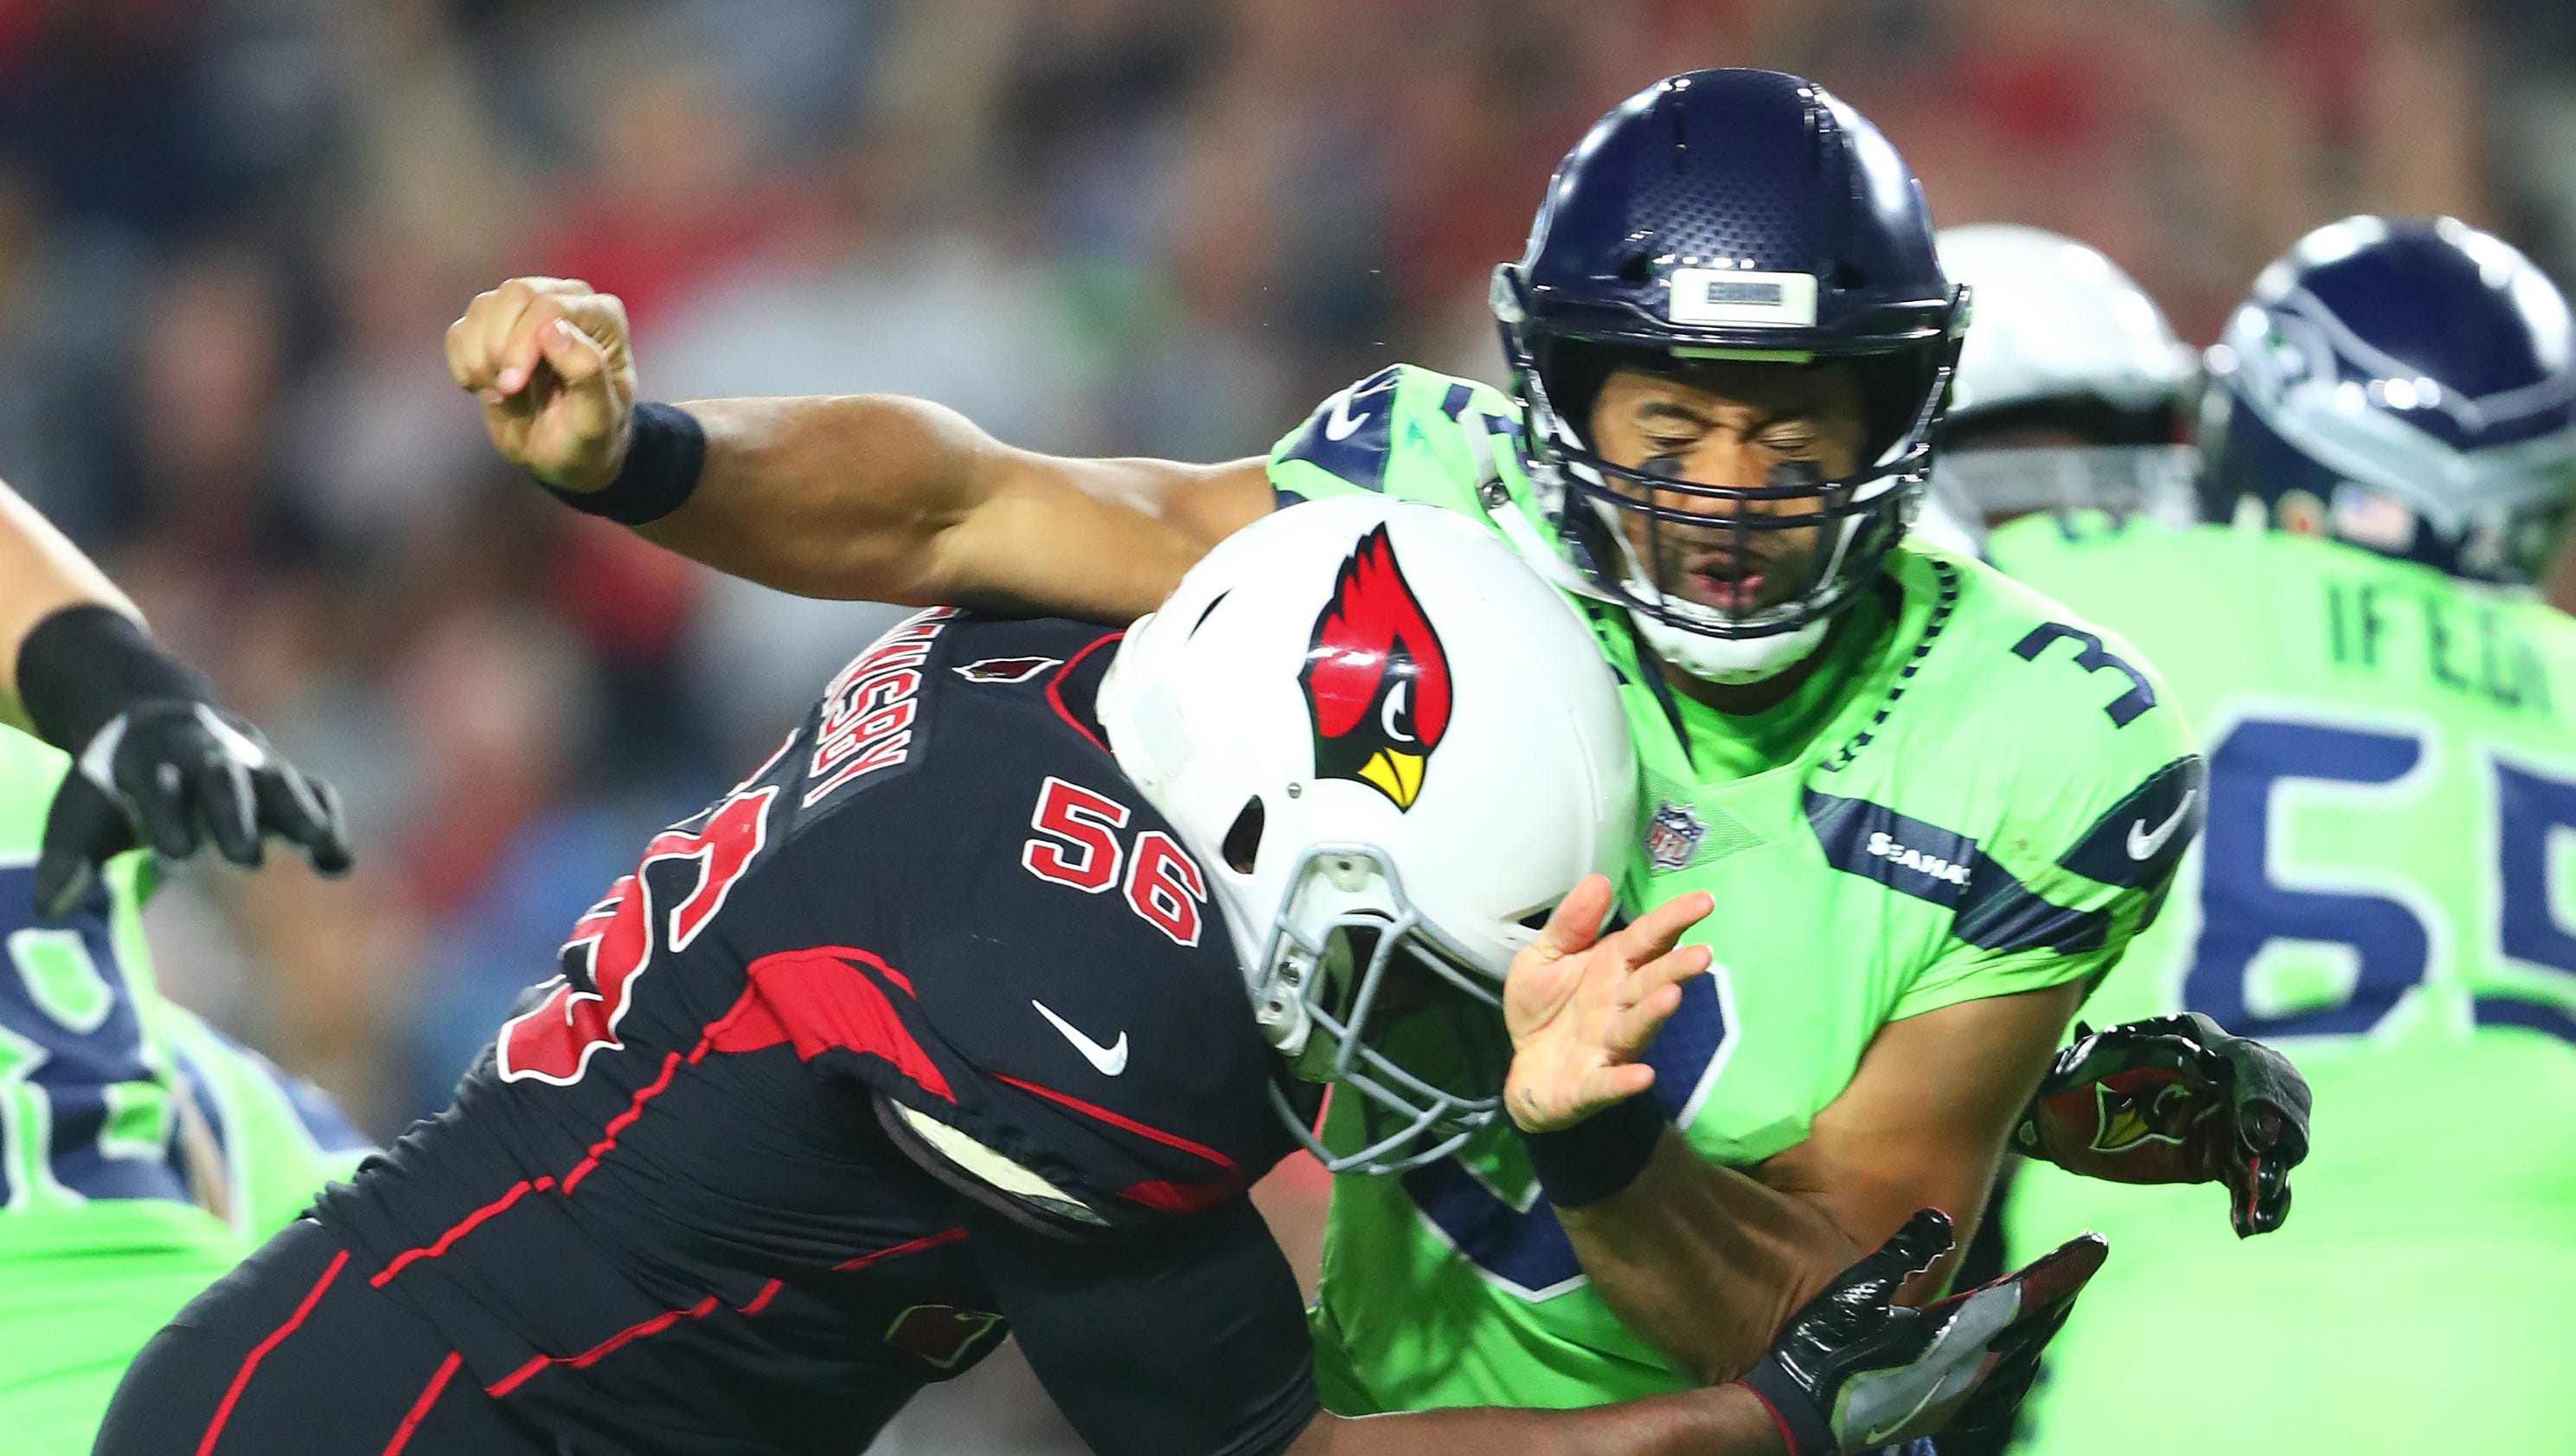 Seahawks fined $100K for Russell Wilson fiasco, team officials to have concussion training